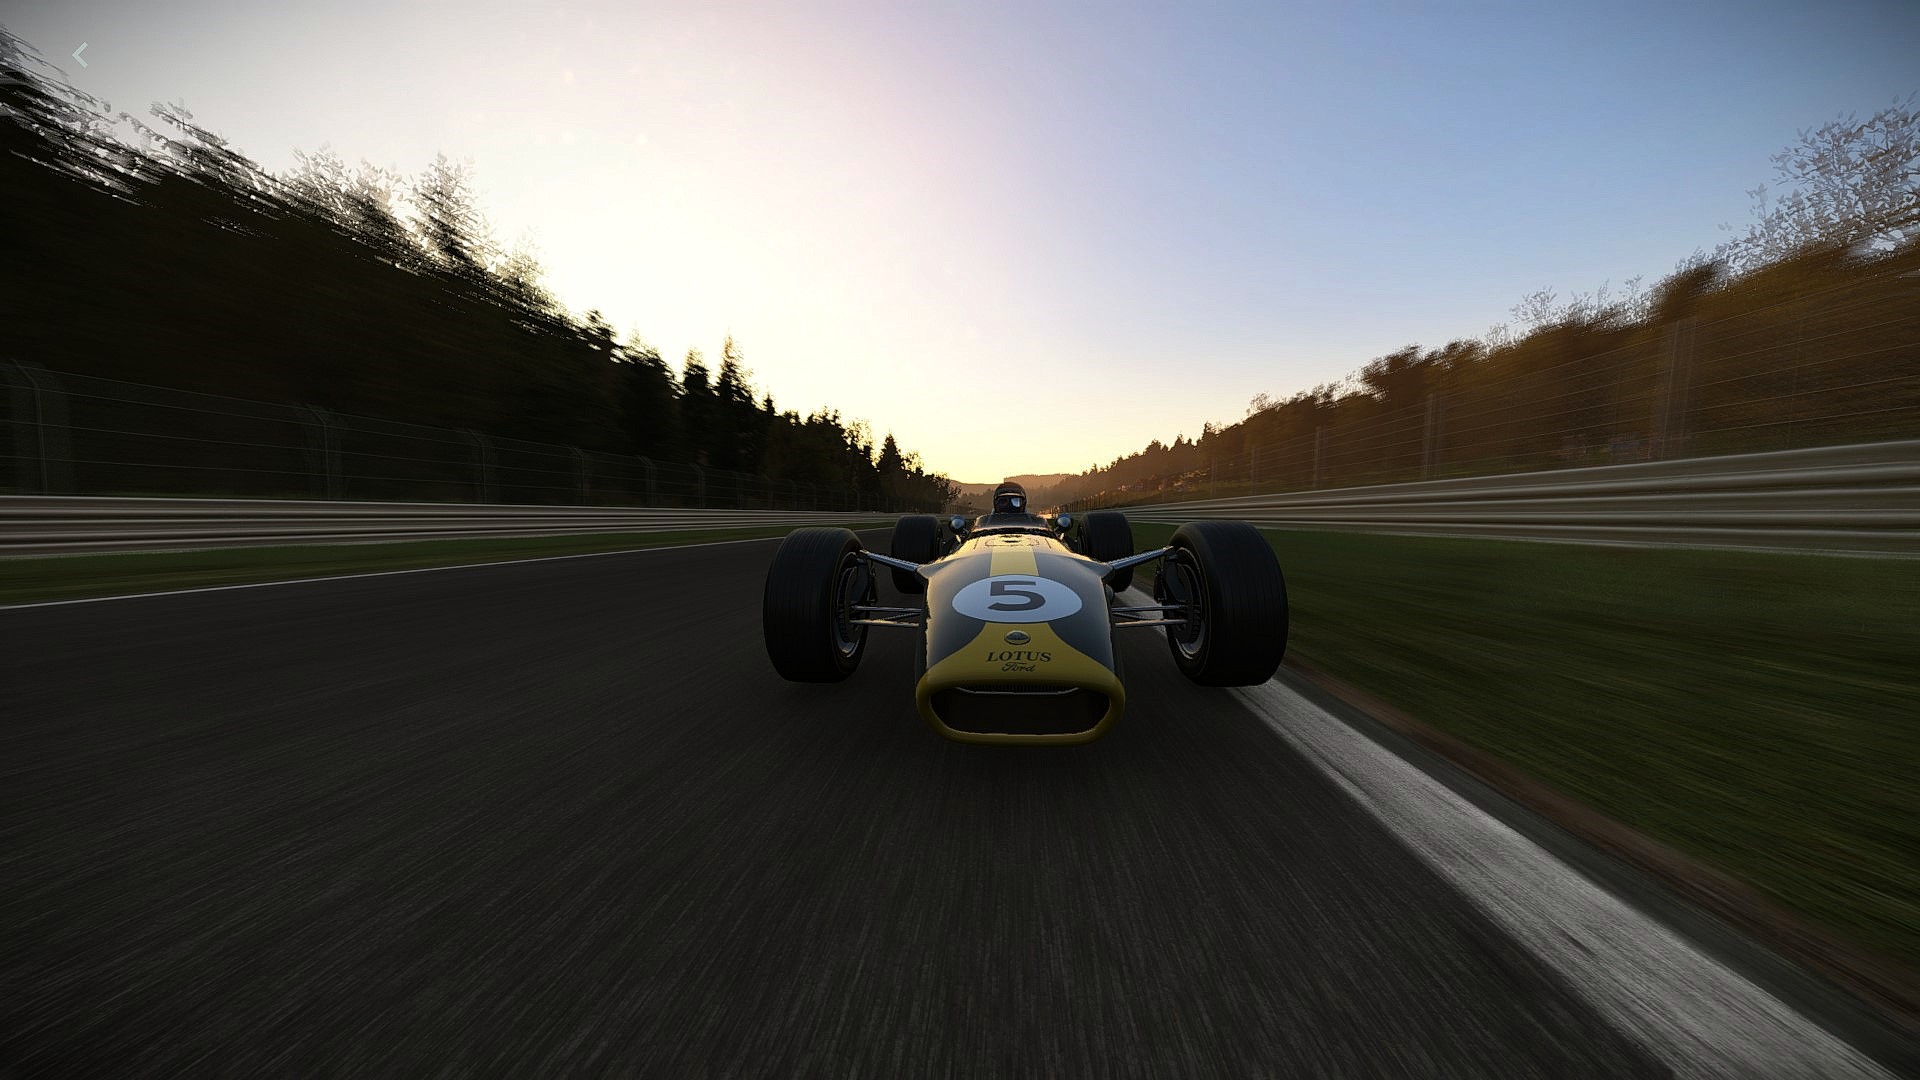 1968 Lotus 49, Spa Francorchamps, Project cars Wallpaper